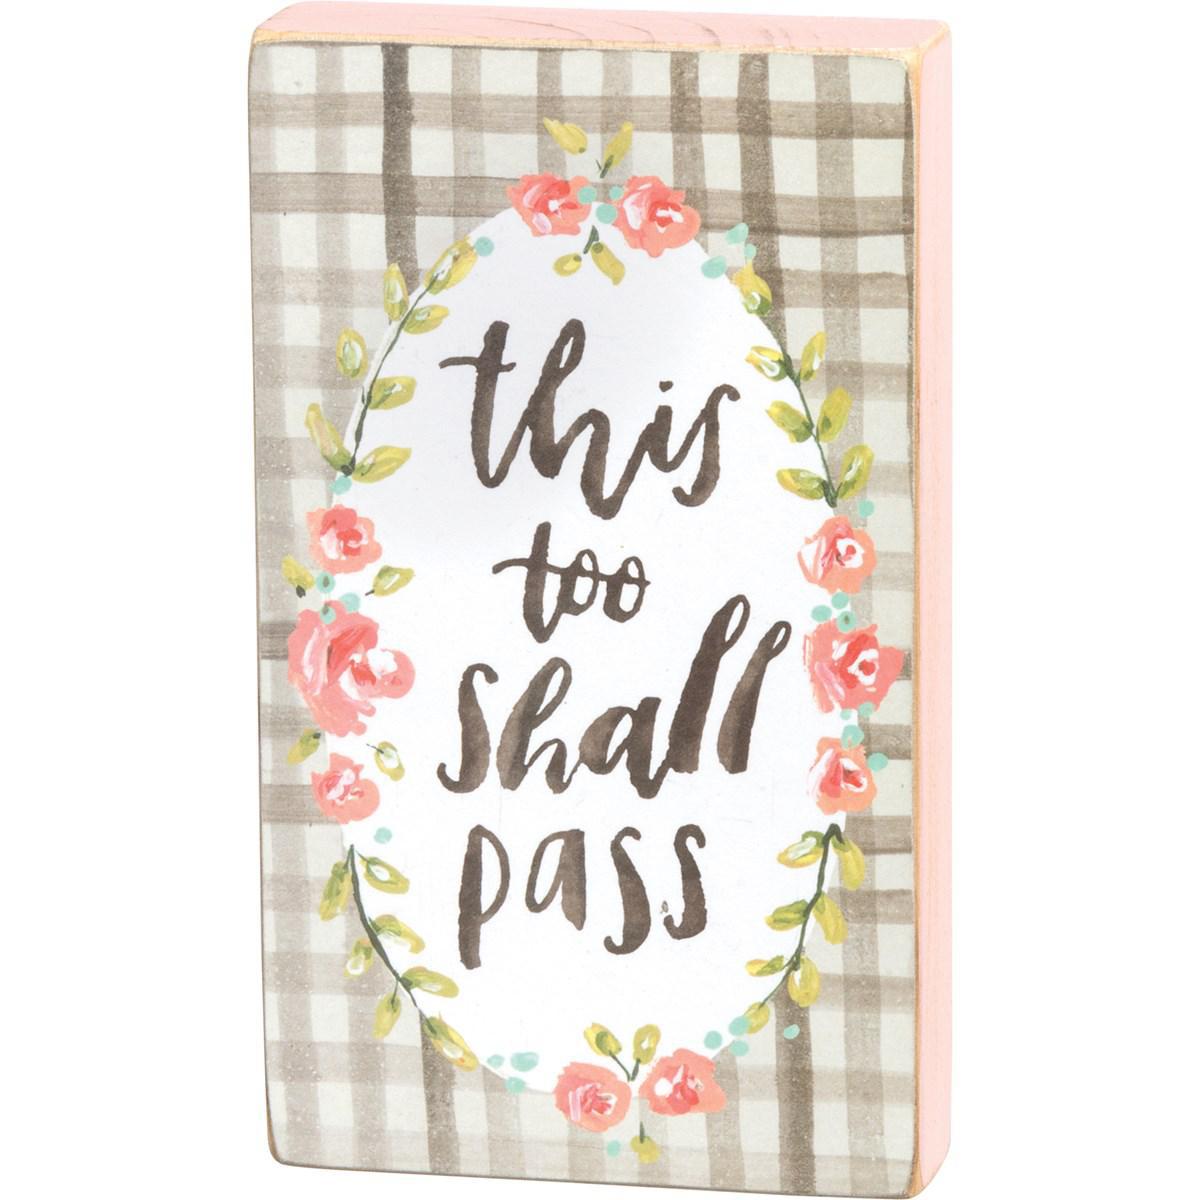 This to Shall Pass